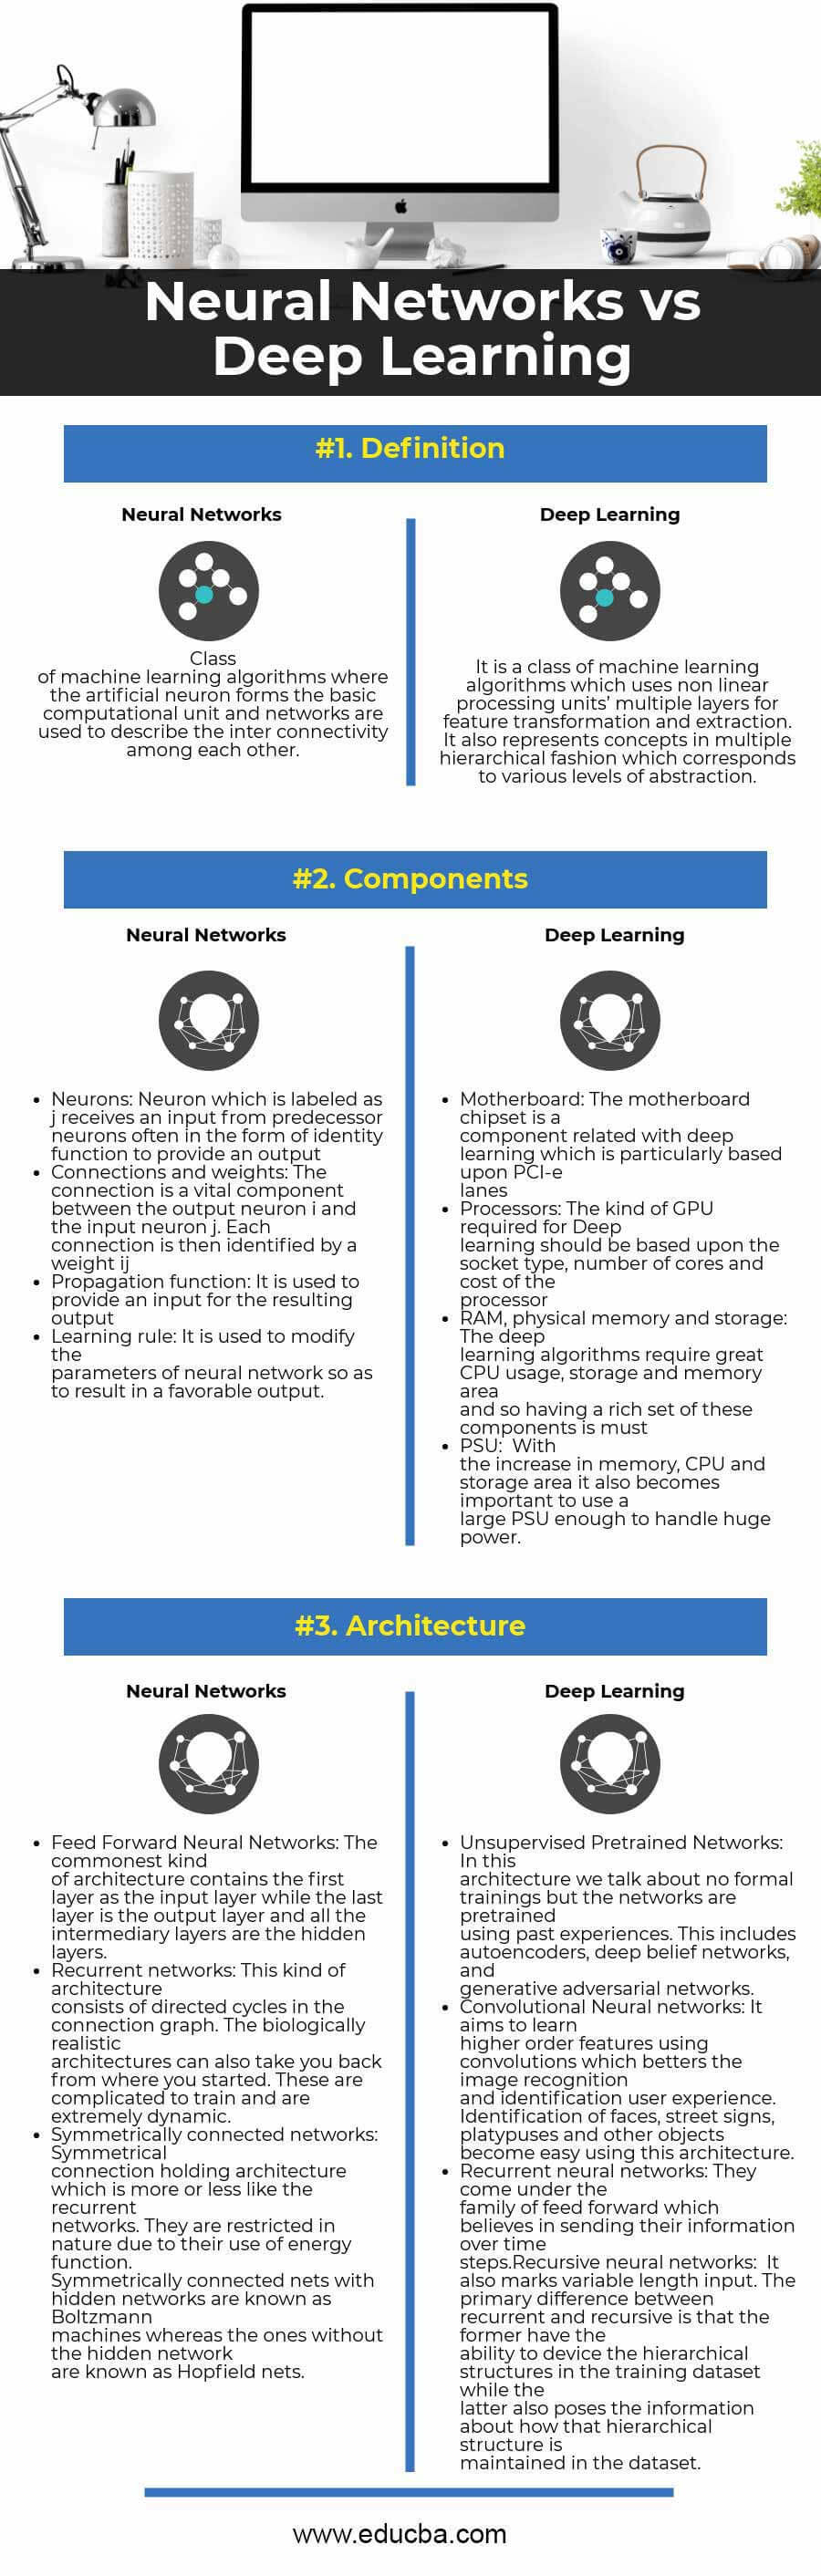 neural networks vs deep learning - useful comparisons to learn